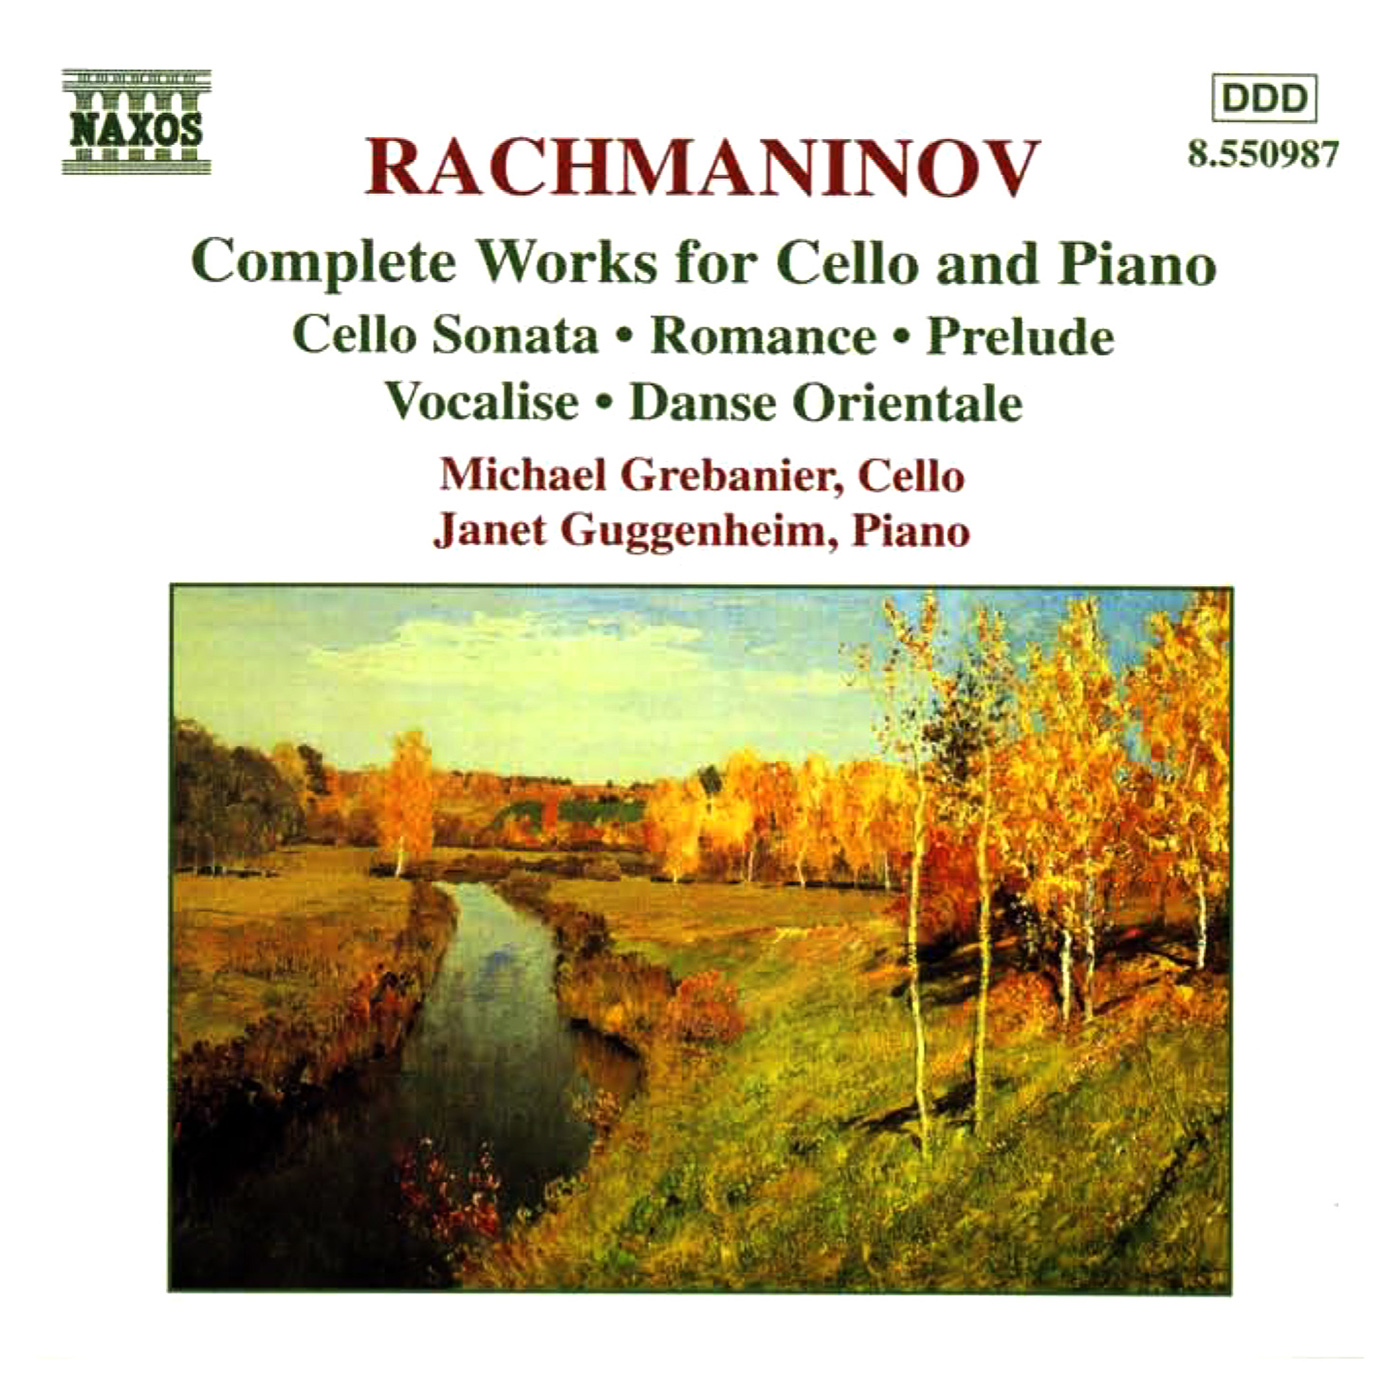 Romance in F Major, Op. 4, No. 3 (arr. A Siloti for cello and piano): Romance in F Major, Op. 4, No. 3 (arr. A. Siloti)